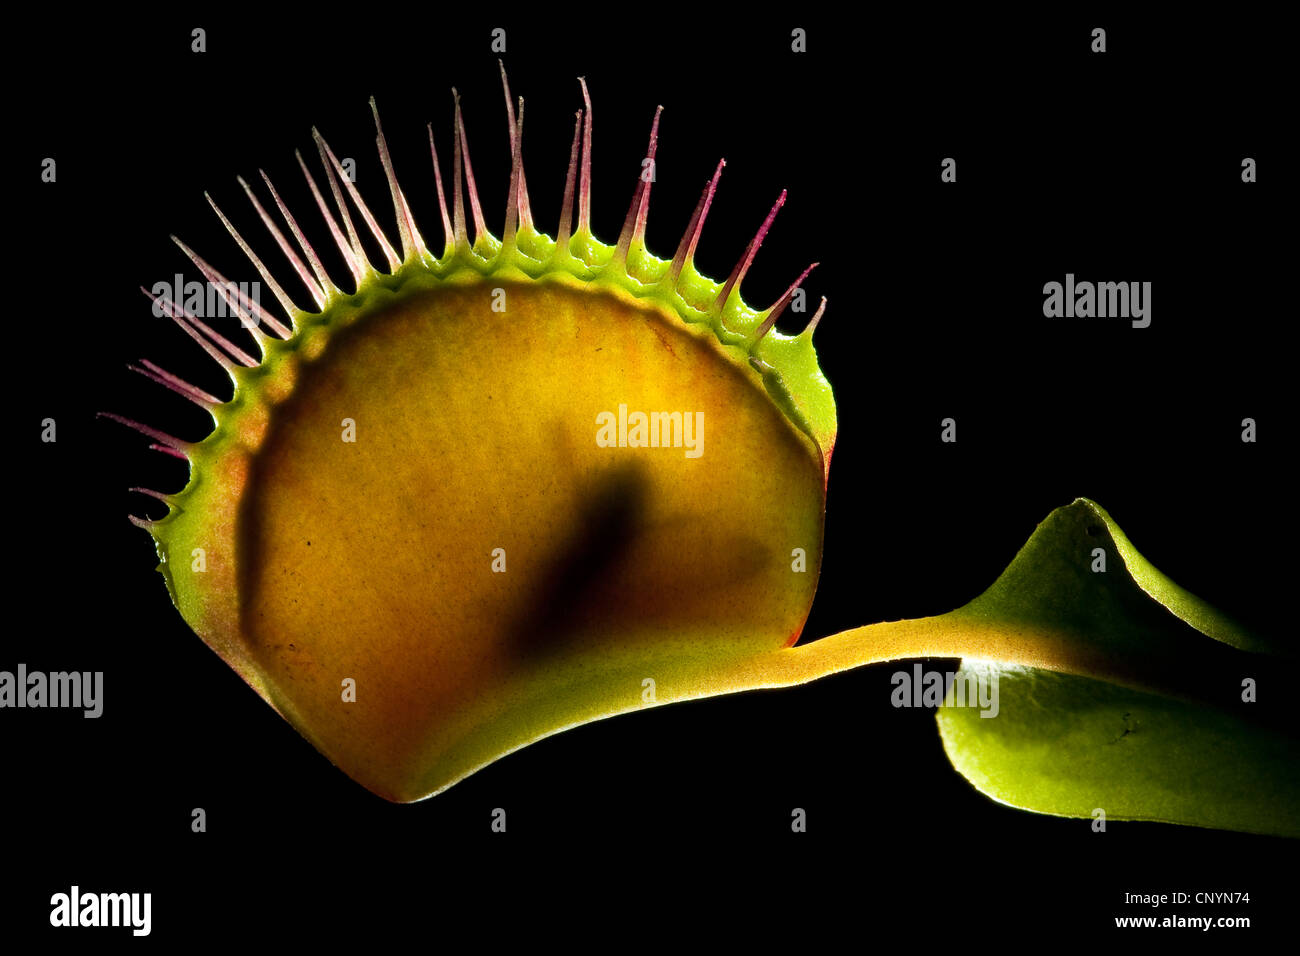 Venus Flytrap, Venus's Flytrap, Venus' Flytrap, Venus Fly Trap, Venus's Fly Trap, Venus' Fly Trap, Fly-Trap (Dionaea muscipula), closed leaf trap with caught fly Stock Photo